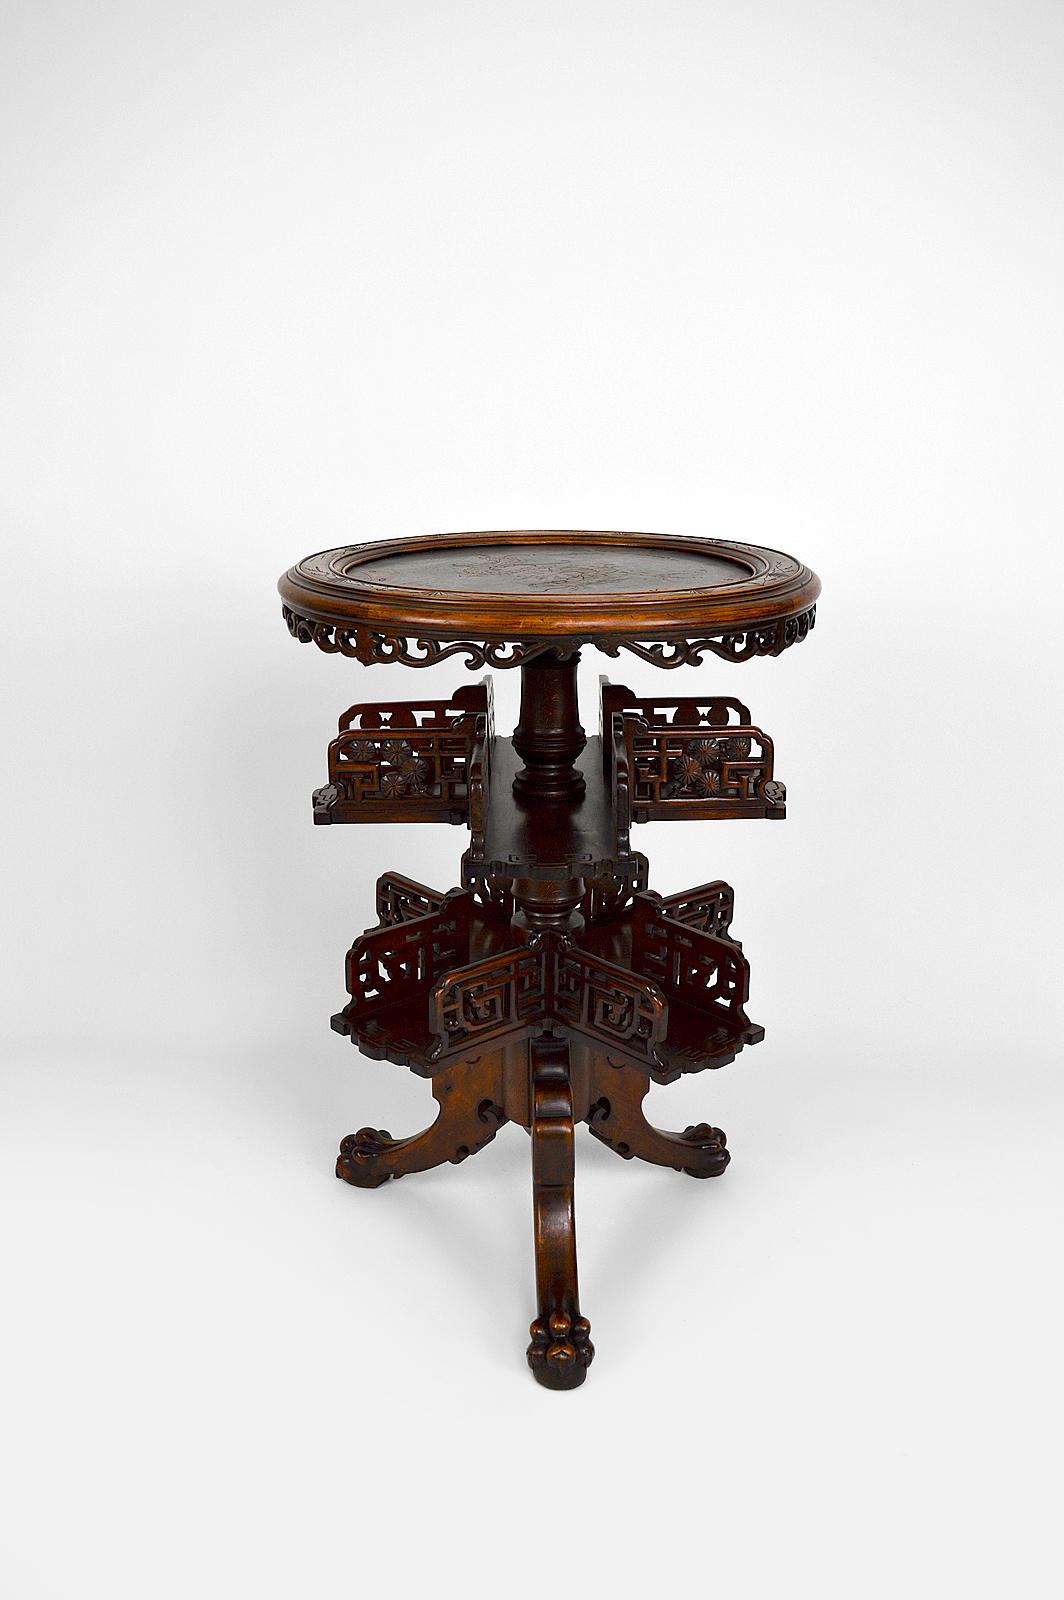 Rare pedestal table / bookcase in Japanese / Chinese / Asian style.

Richly carved : top decorated with a dragon, openwork swivel shelves and tripod base carved with clawed legs.

Art Nouveau / Japonisme, France, around 1880.
By Gabriel Viardot